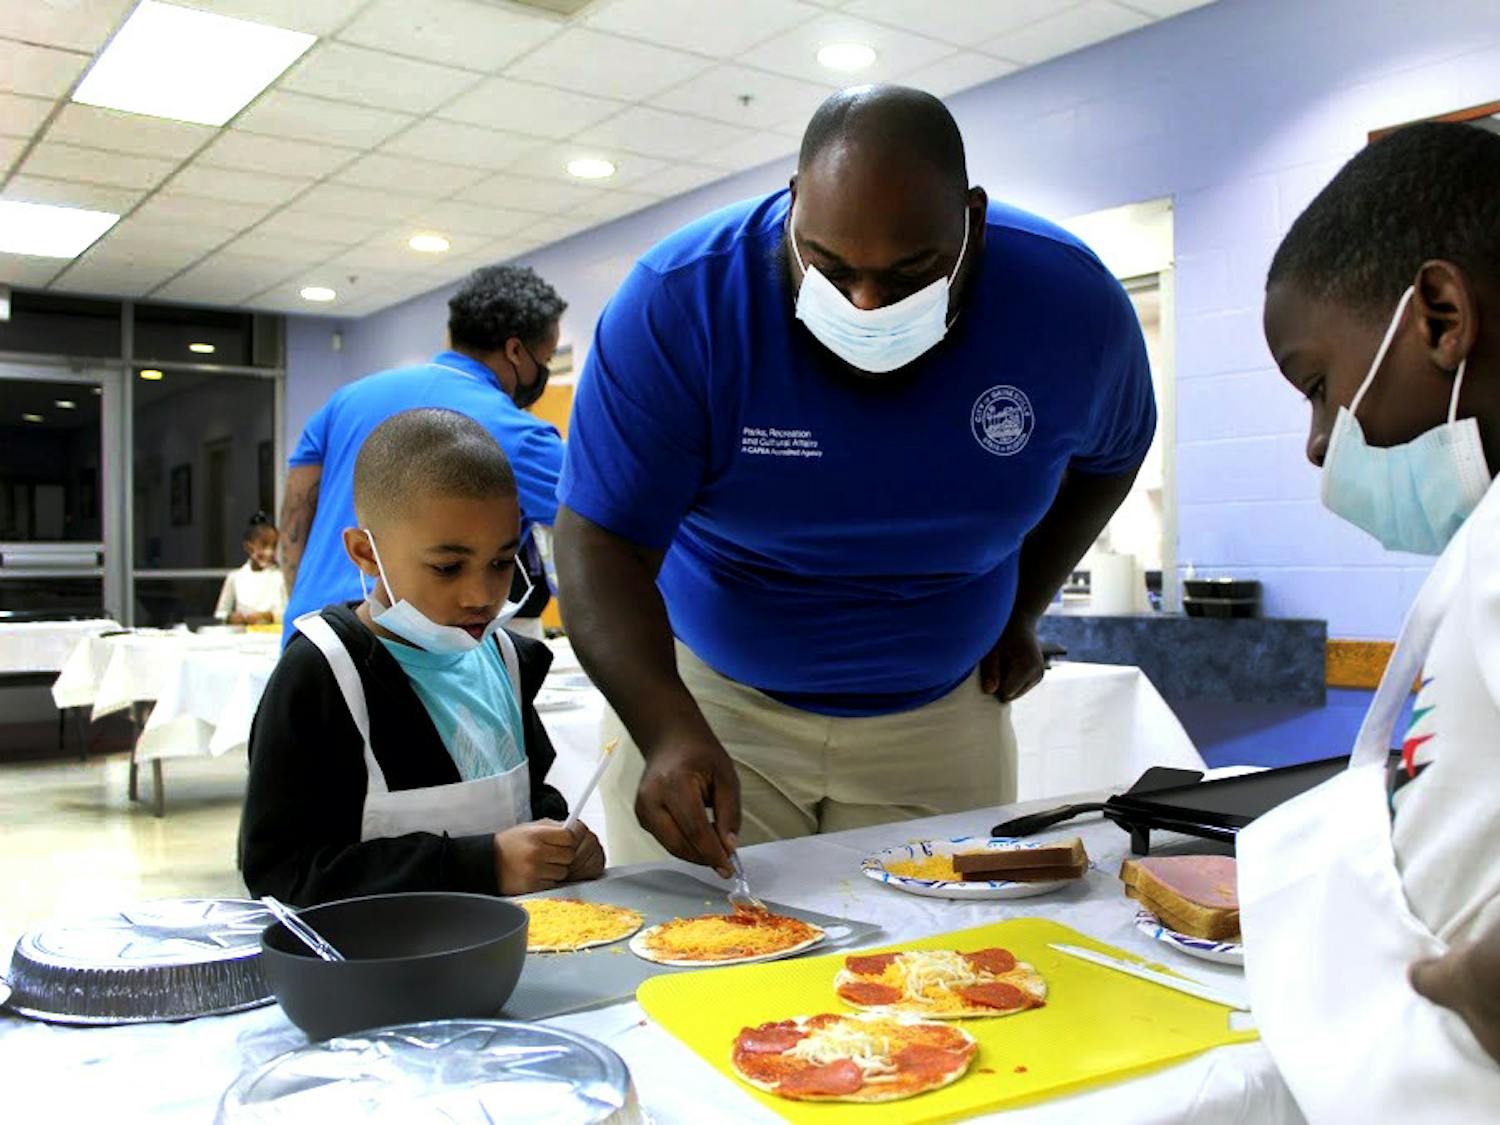 Luis McLeod (middle), recreation aide, helps Cayson Dumas (left), 7, and Jacari Holoie (right), 8, grill pepperoni pizzas at the Eastside Community Center on Monday, Jan. 31.